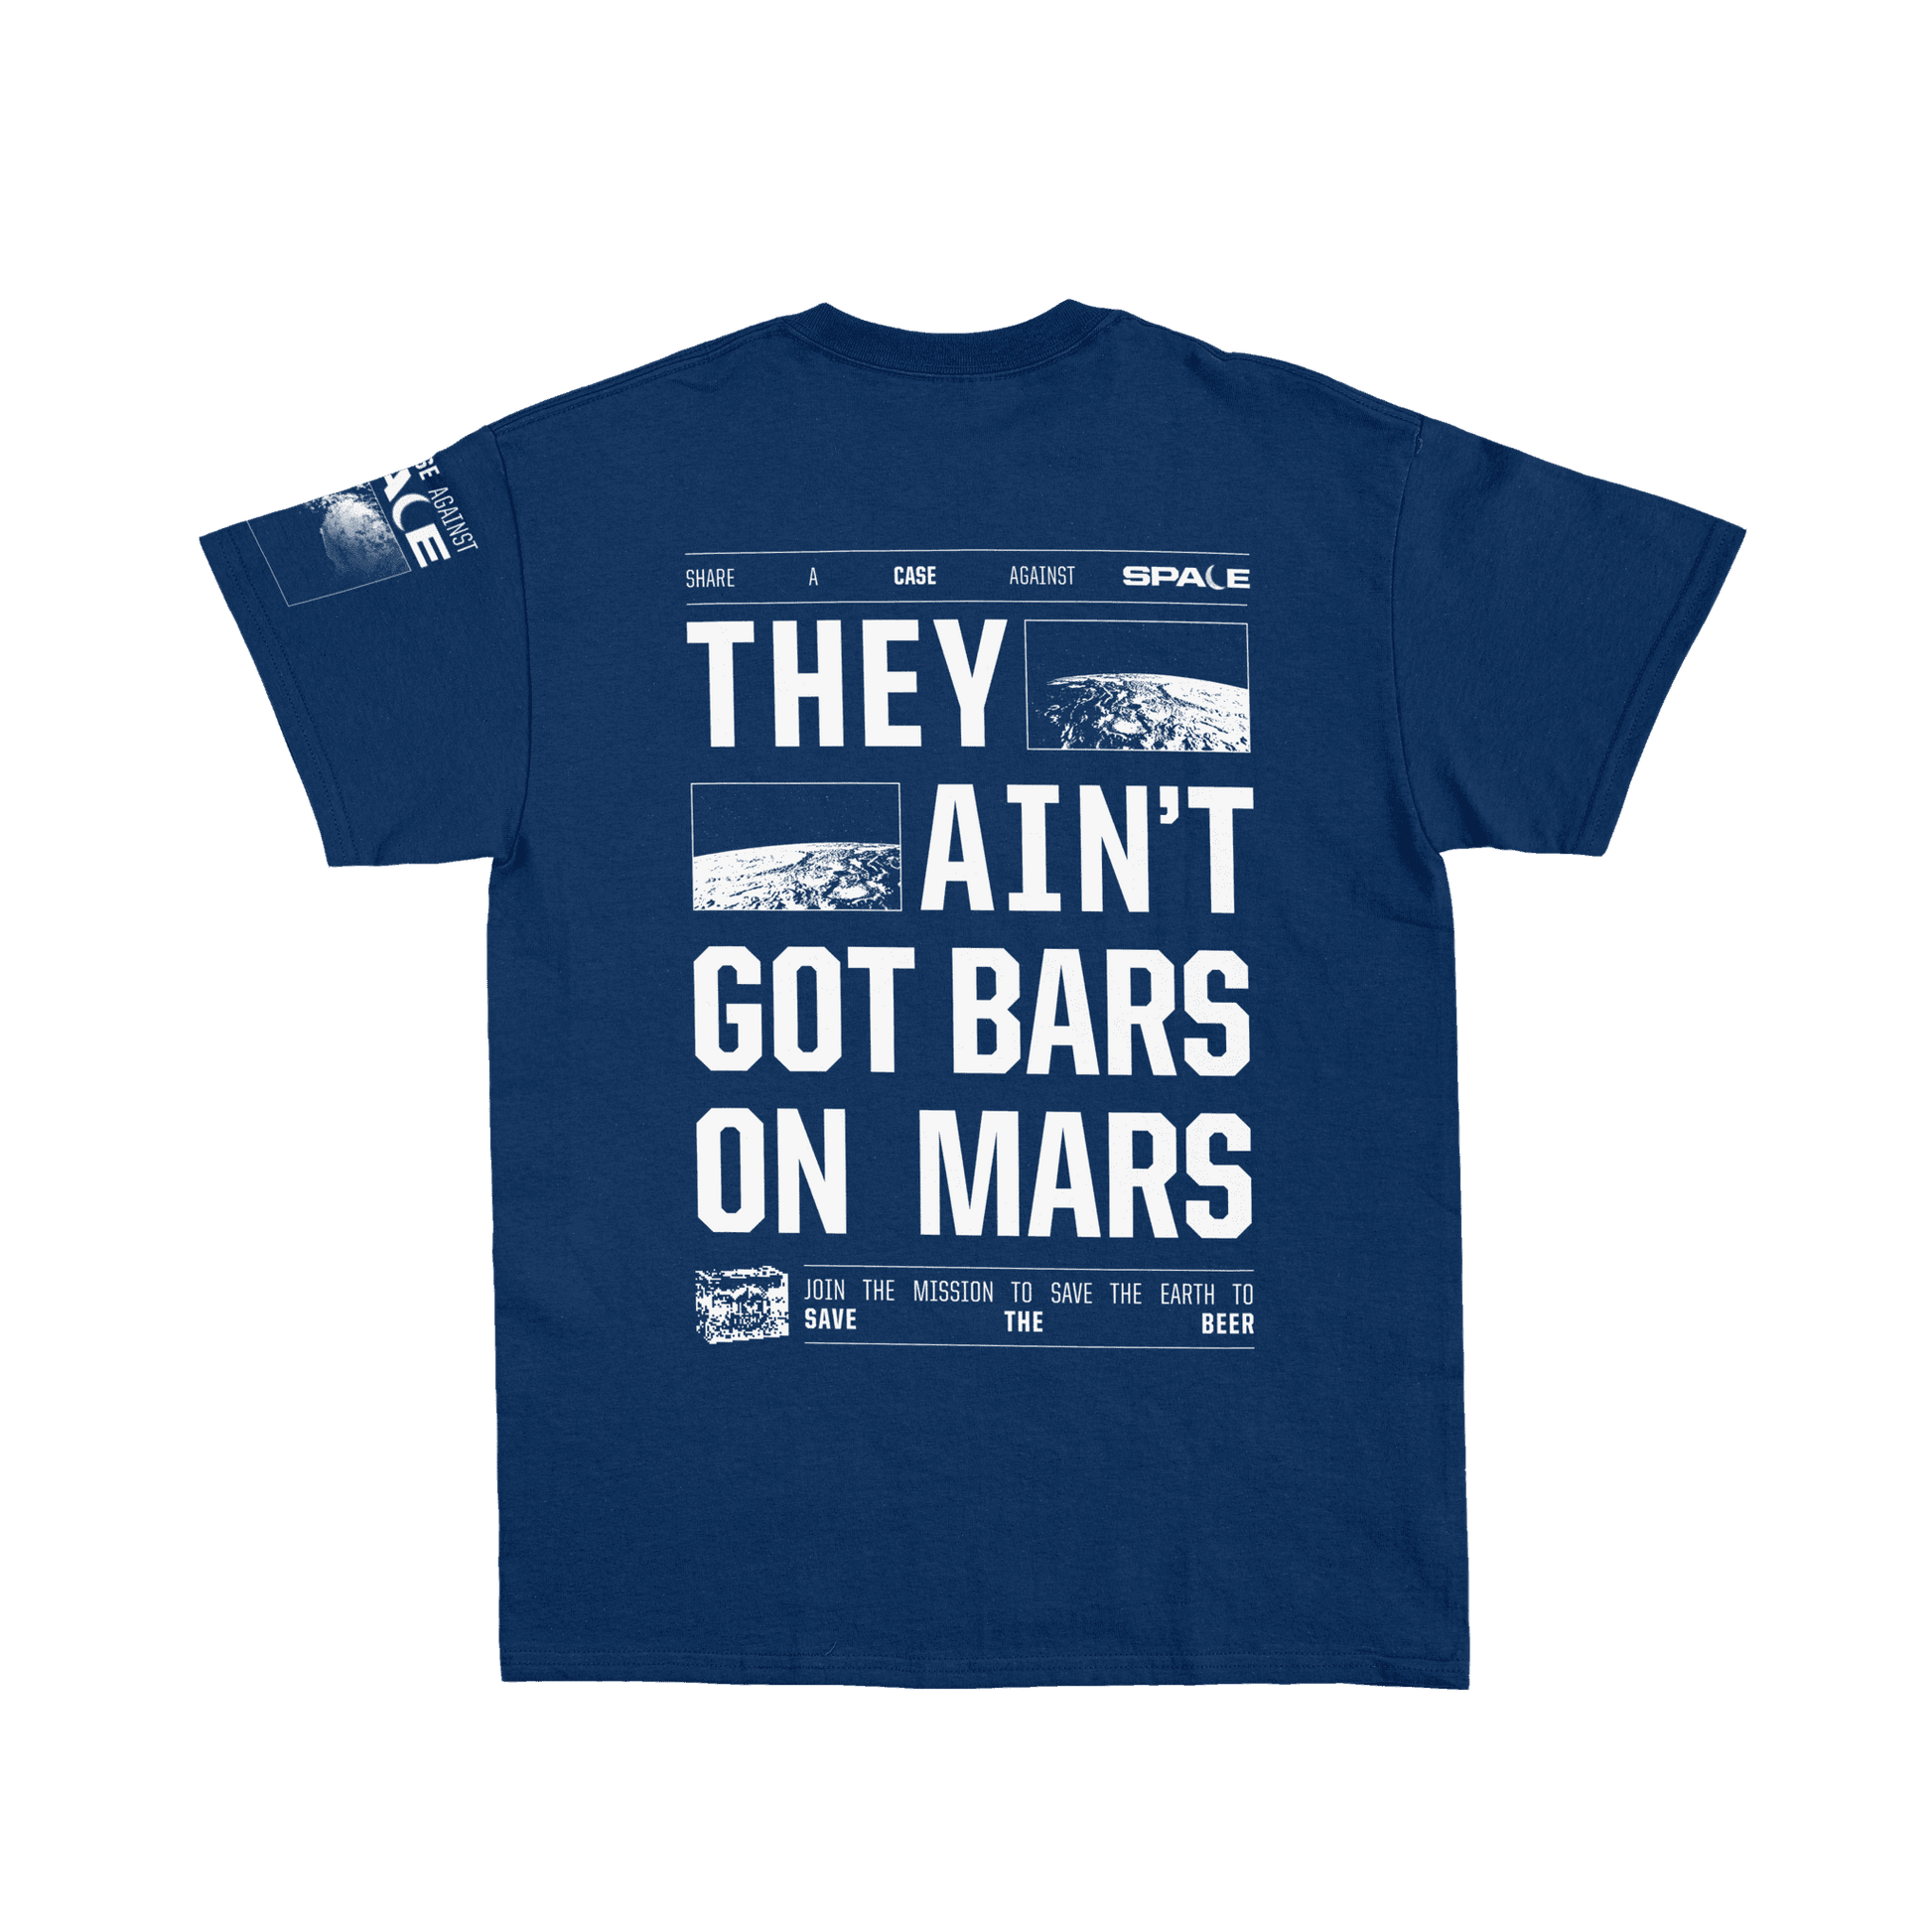 Busch Light "They ain't got bars on Mars" Case Against Space Tee